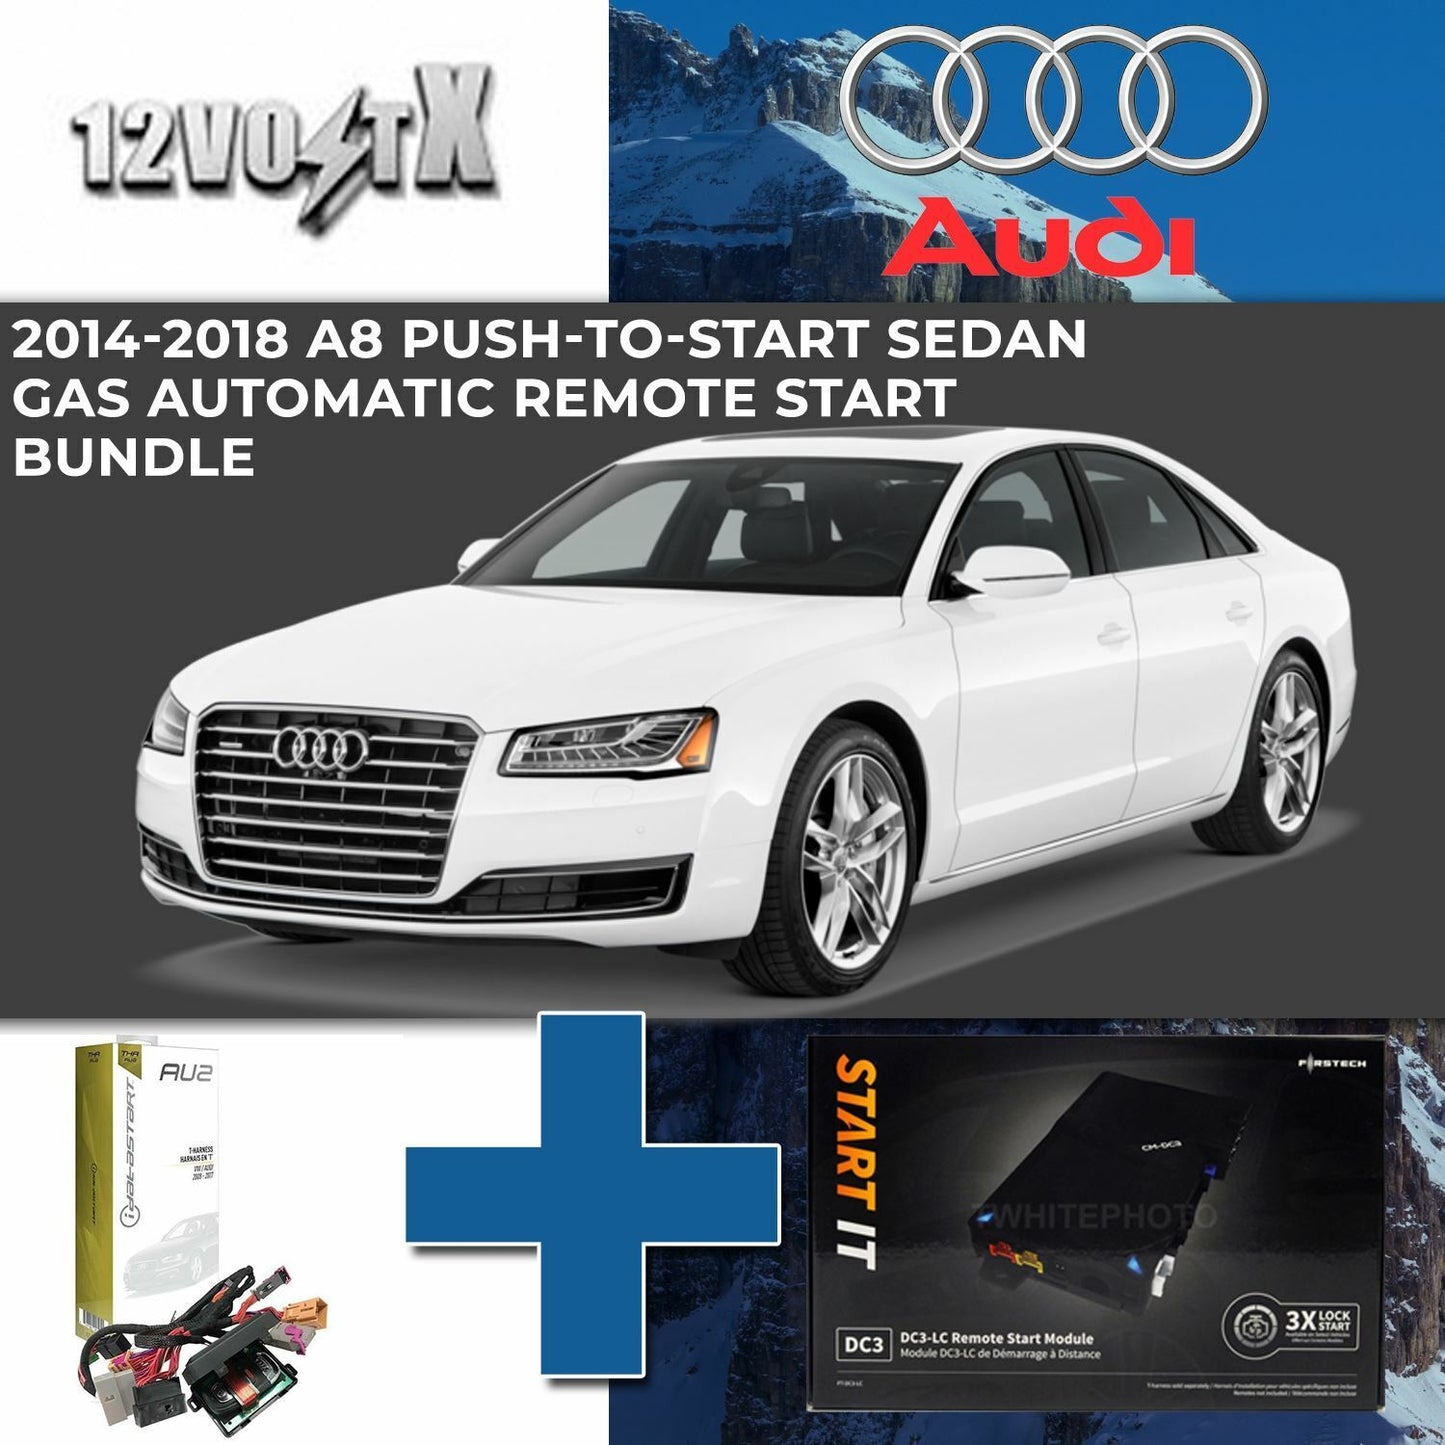 Remote Start System for 2014-2018 Audi A8 Push-to-Start Sedan Gas Automatic